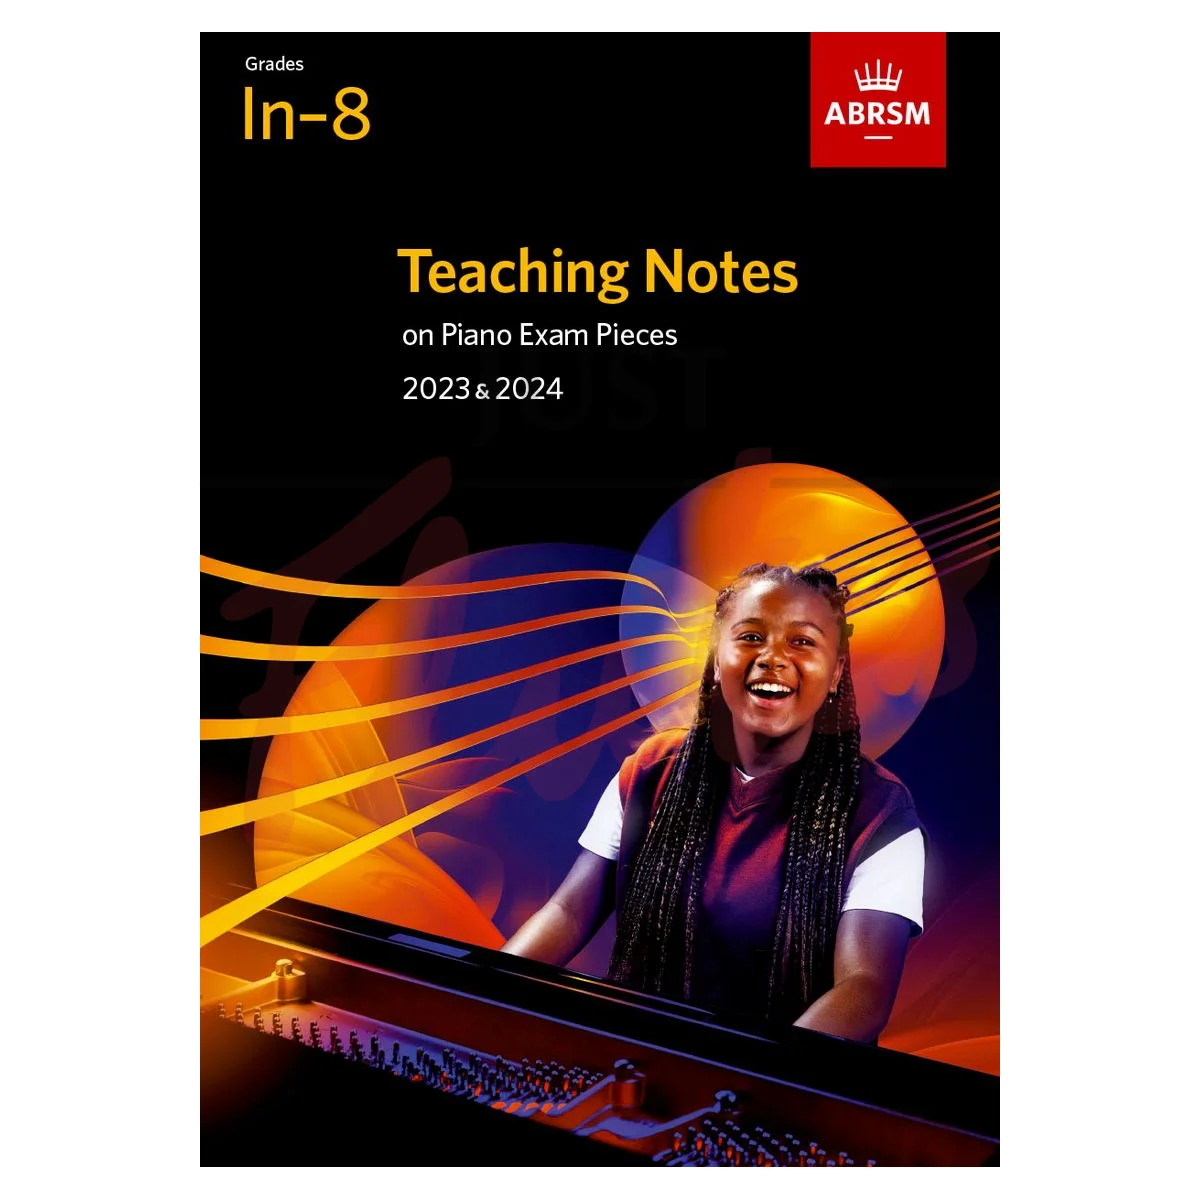 Teaching Notes On Piano Exam Pieces Grades In-8 2023 &amp; 2024